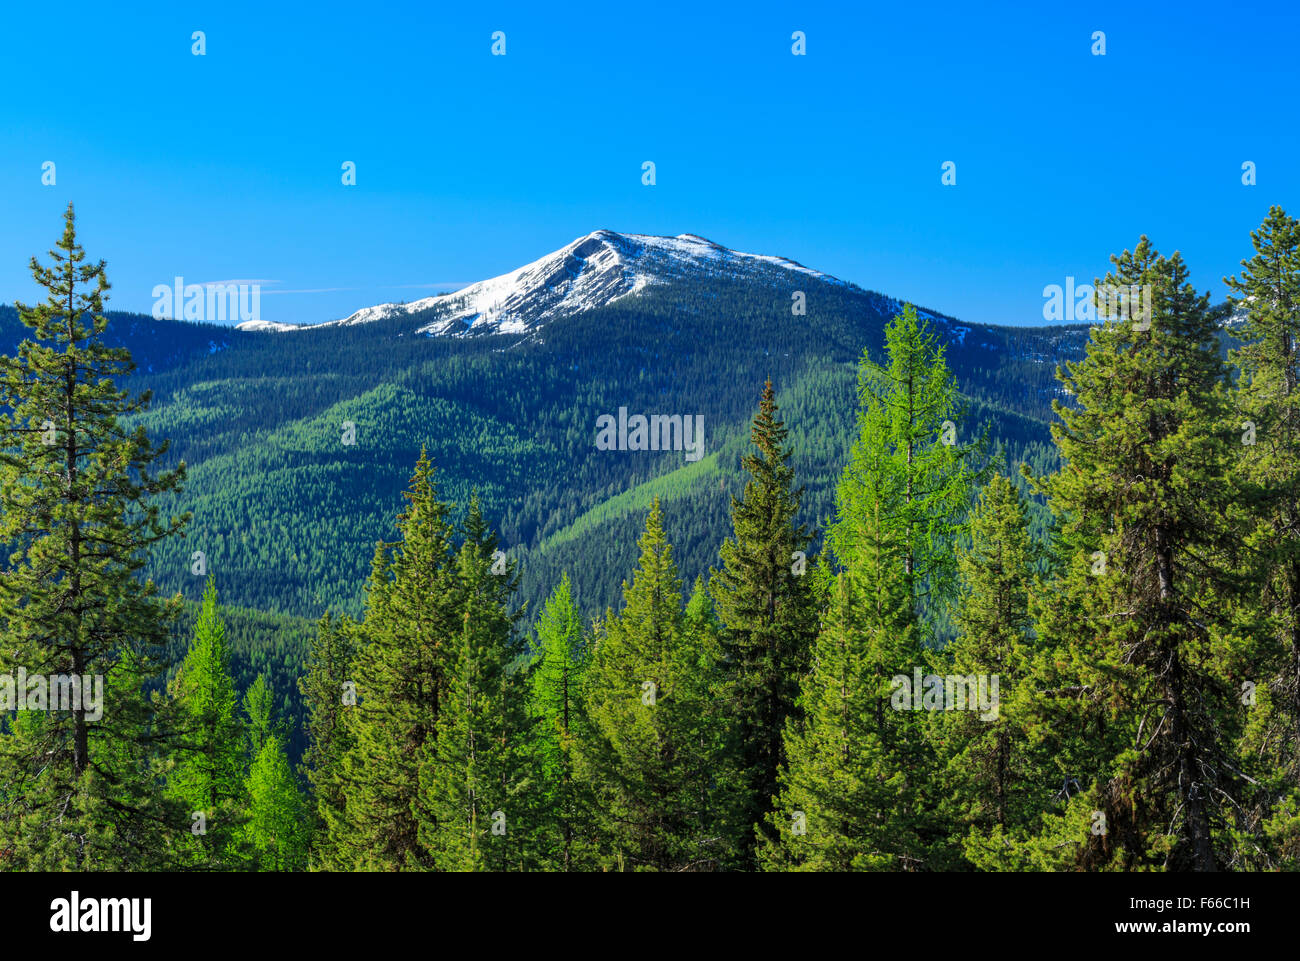 roderick mountain in the percell mountains near yaak, montana Stock Photo